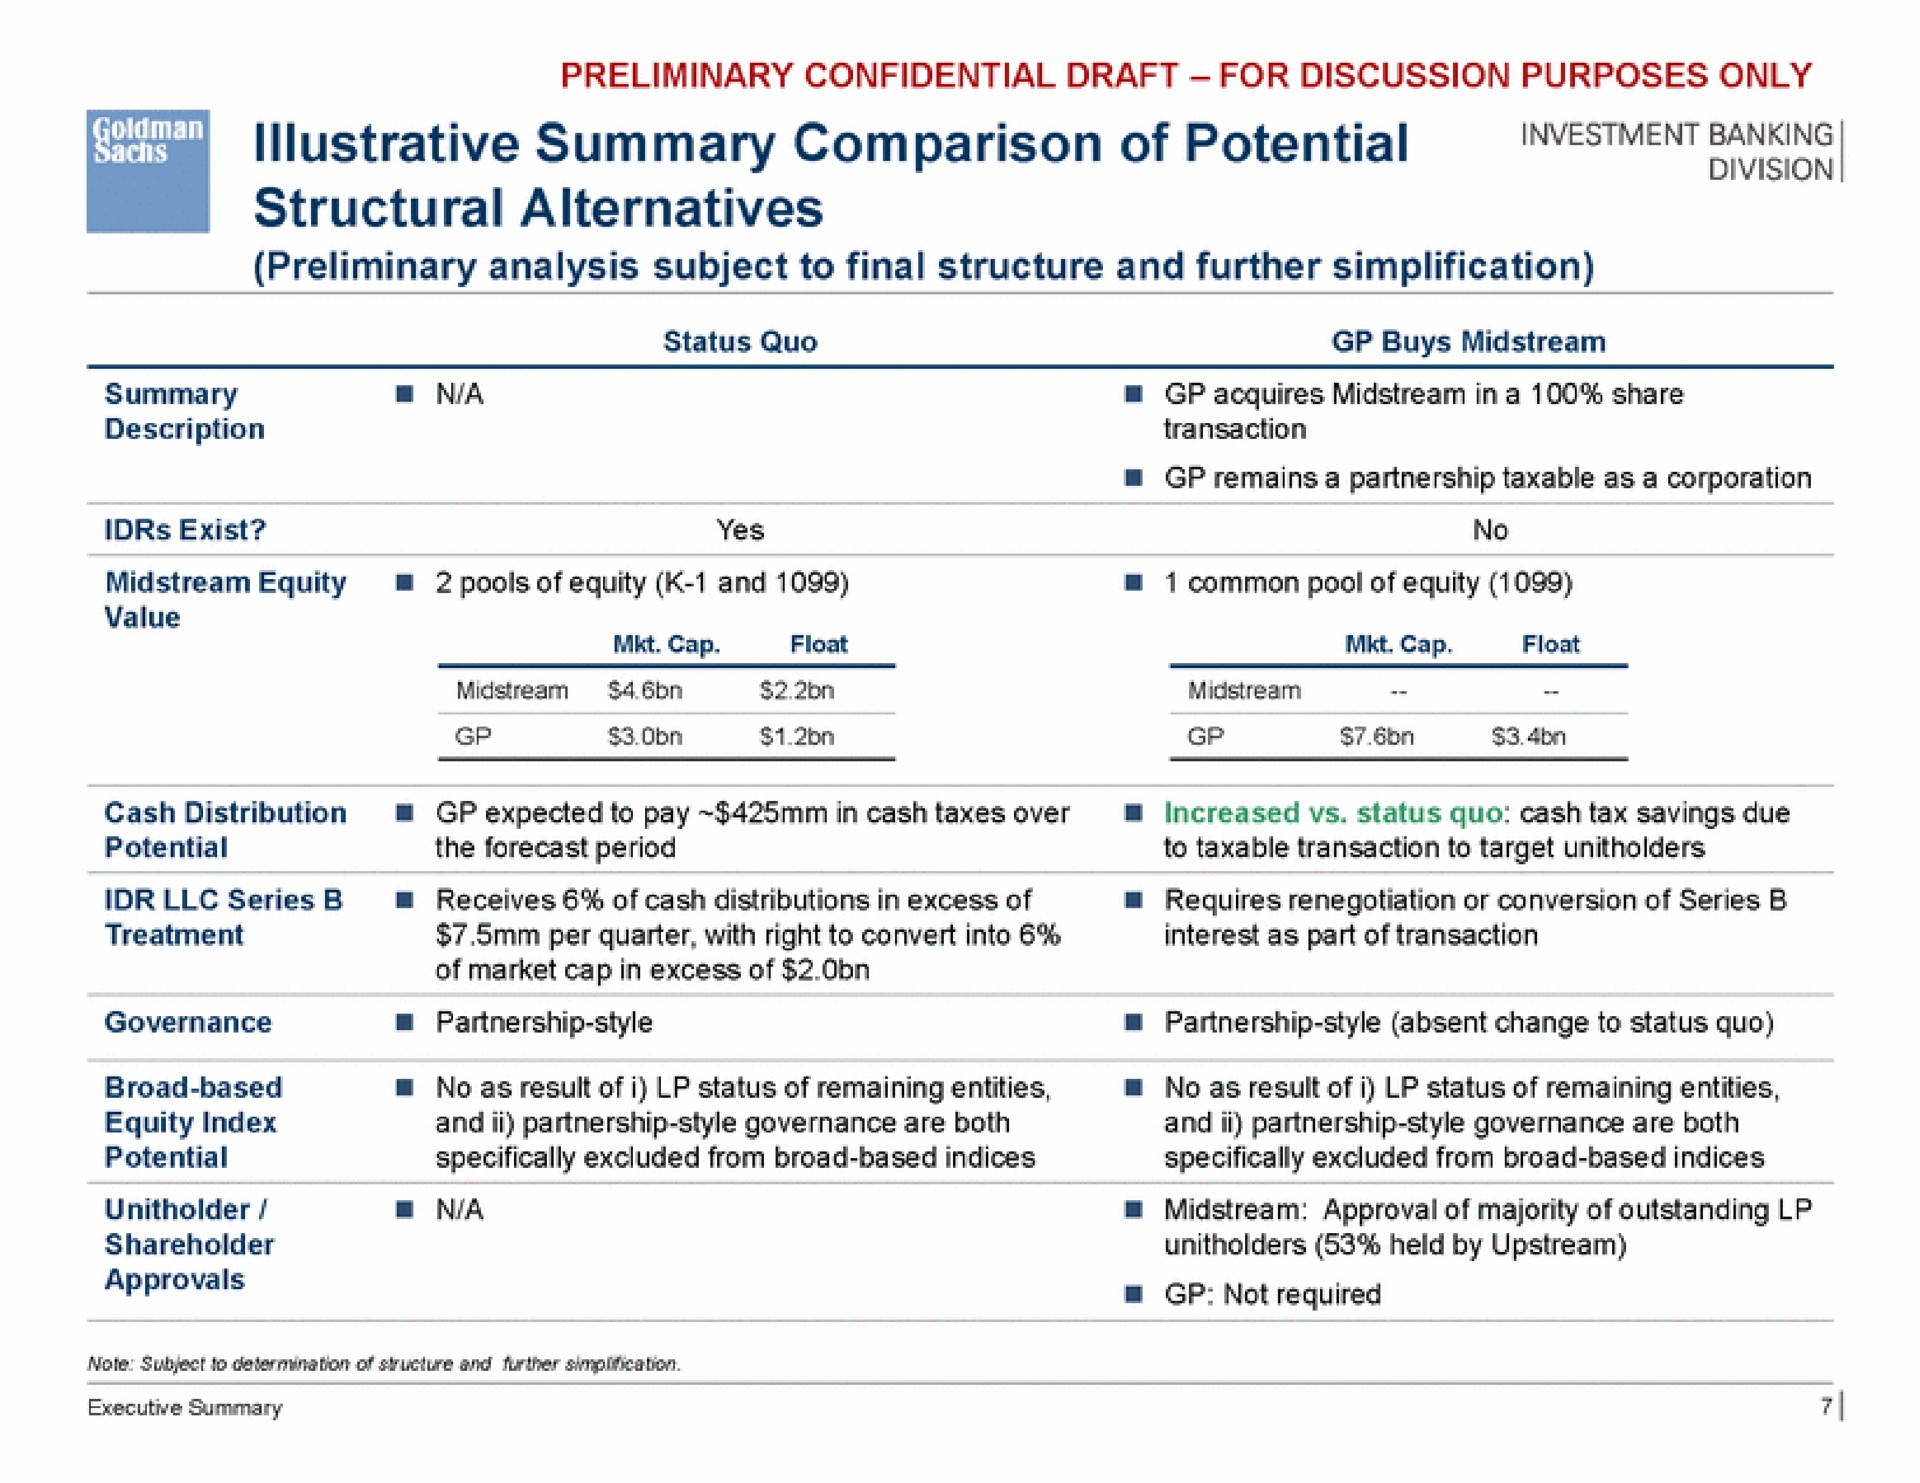 sons summary comparison of potential structural alternatives | Goldman Sachs